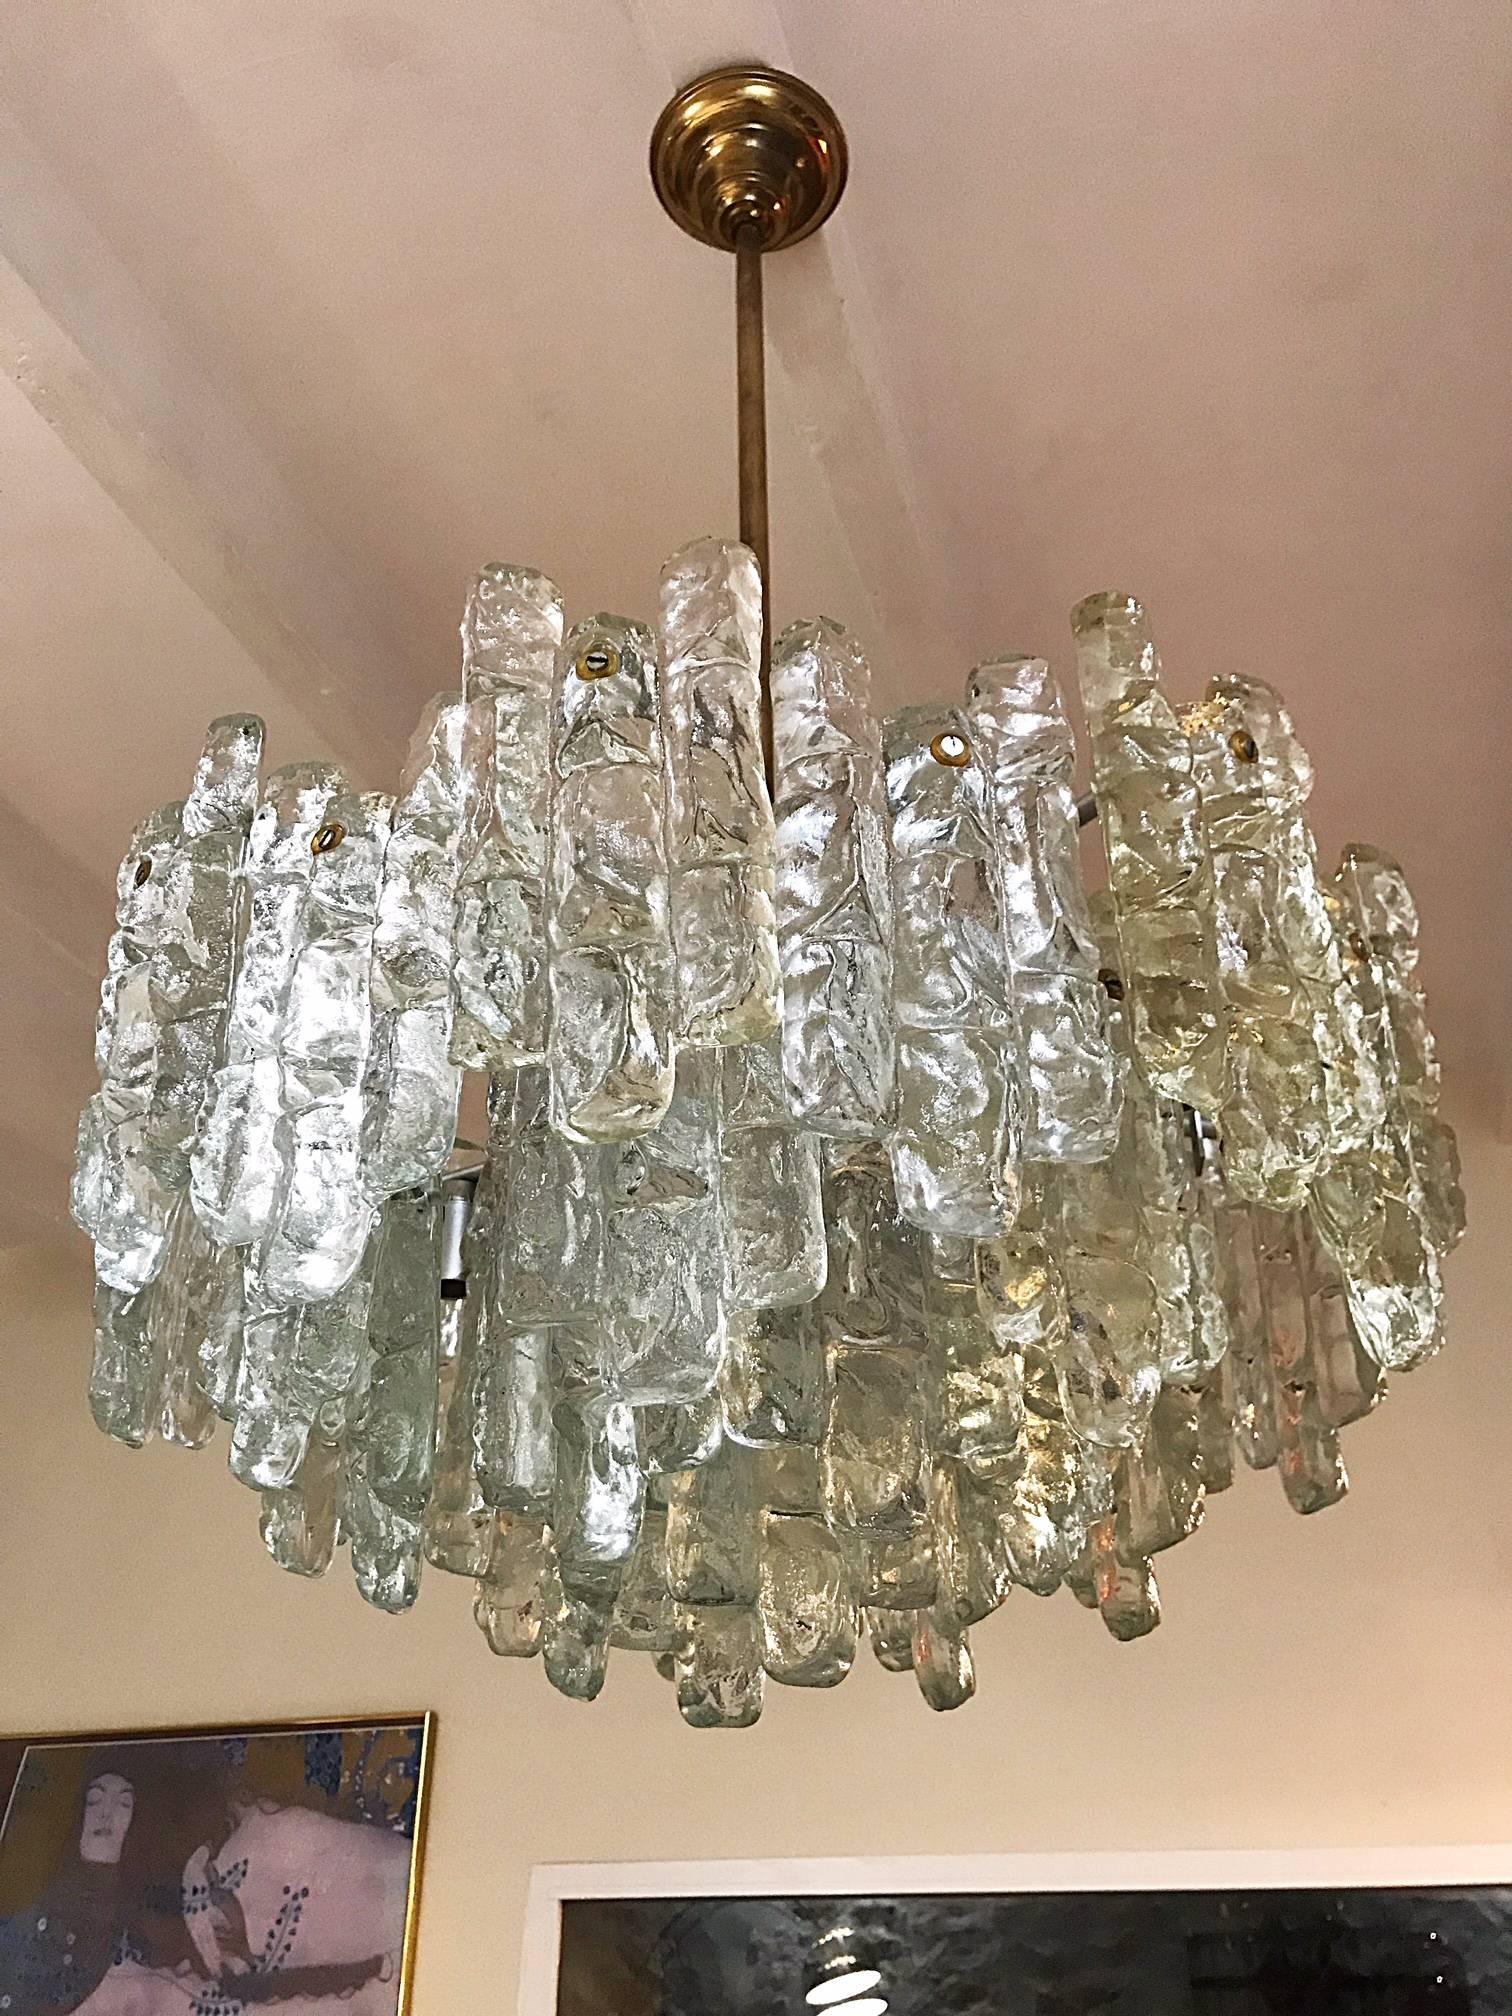 A tiered glass chandelier on a chrome frame by J.T. Kalmar, Austrian, 1972.
Lovely design, each chandelier has sockets (E27). Measures: 36 Pieces , 60cm.
A real stunning ORIGINAL vintage period lamp !! Model made in hand-made by the greatest